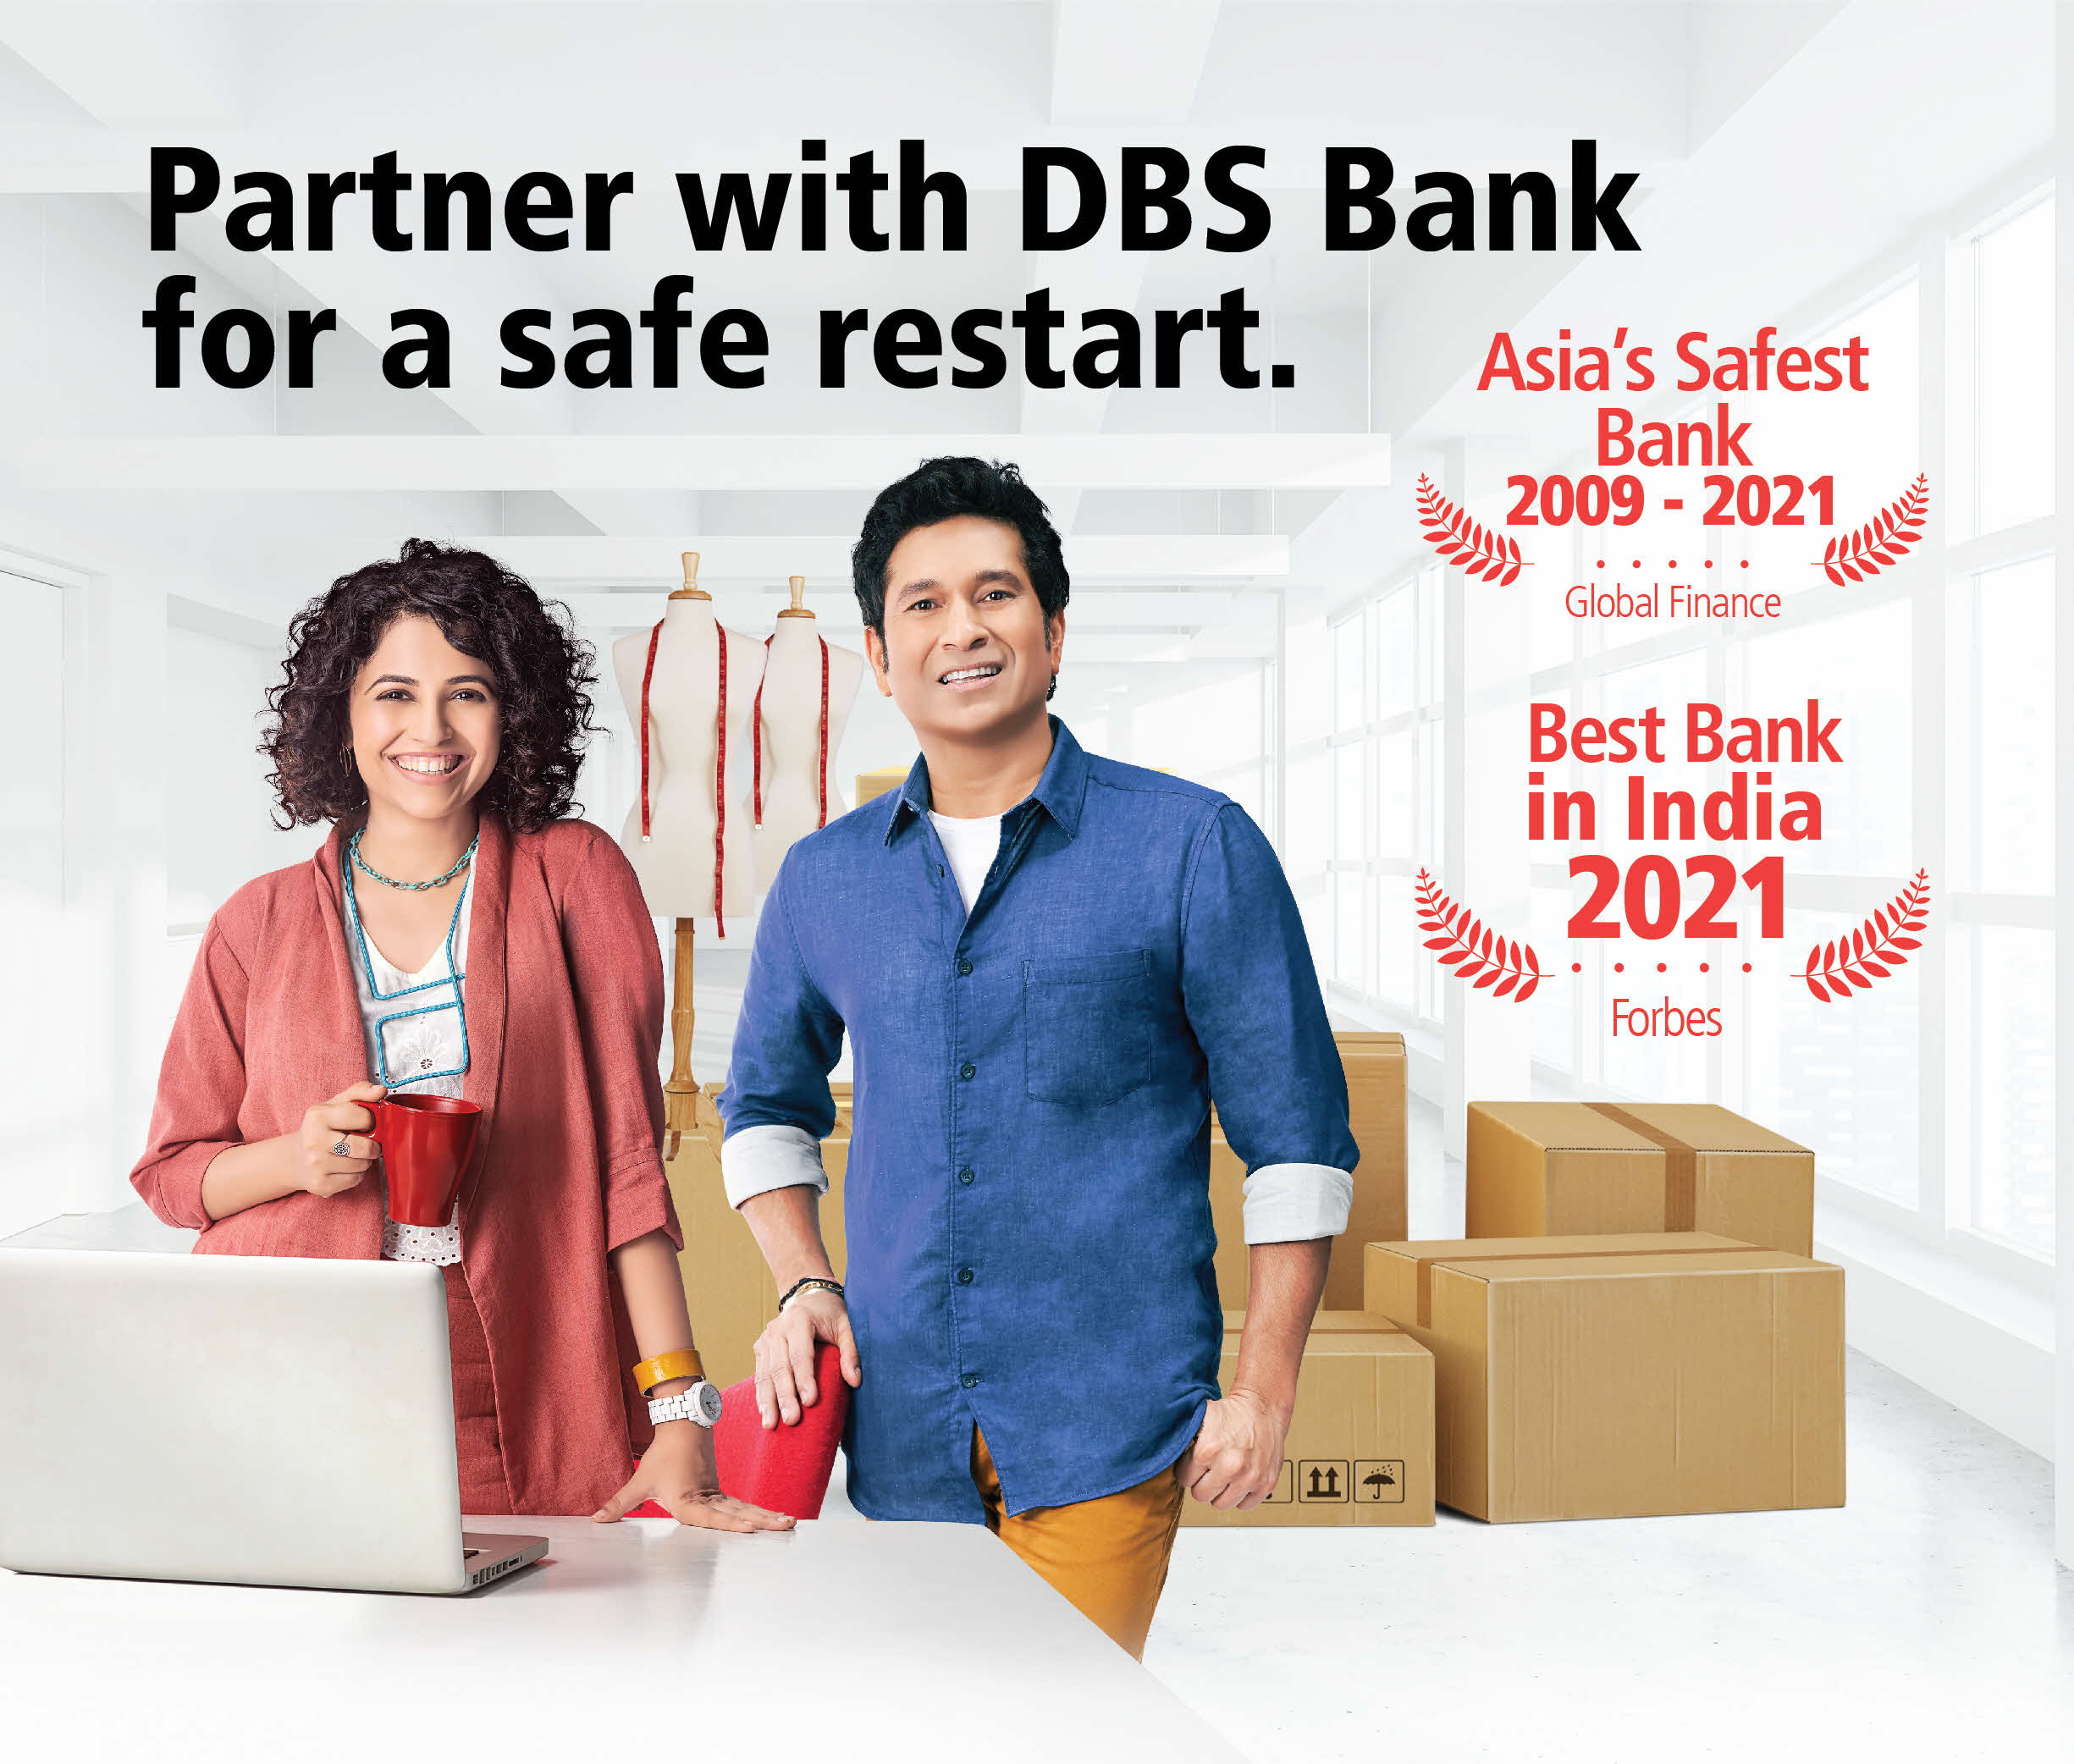 Restart safely with DBS Bank